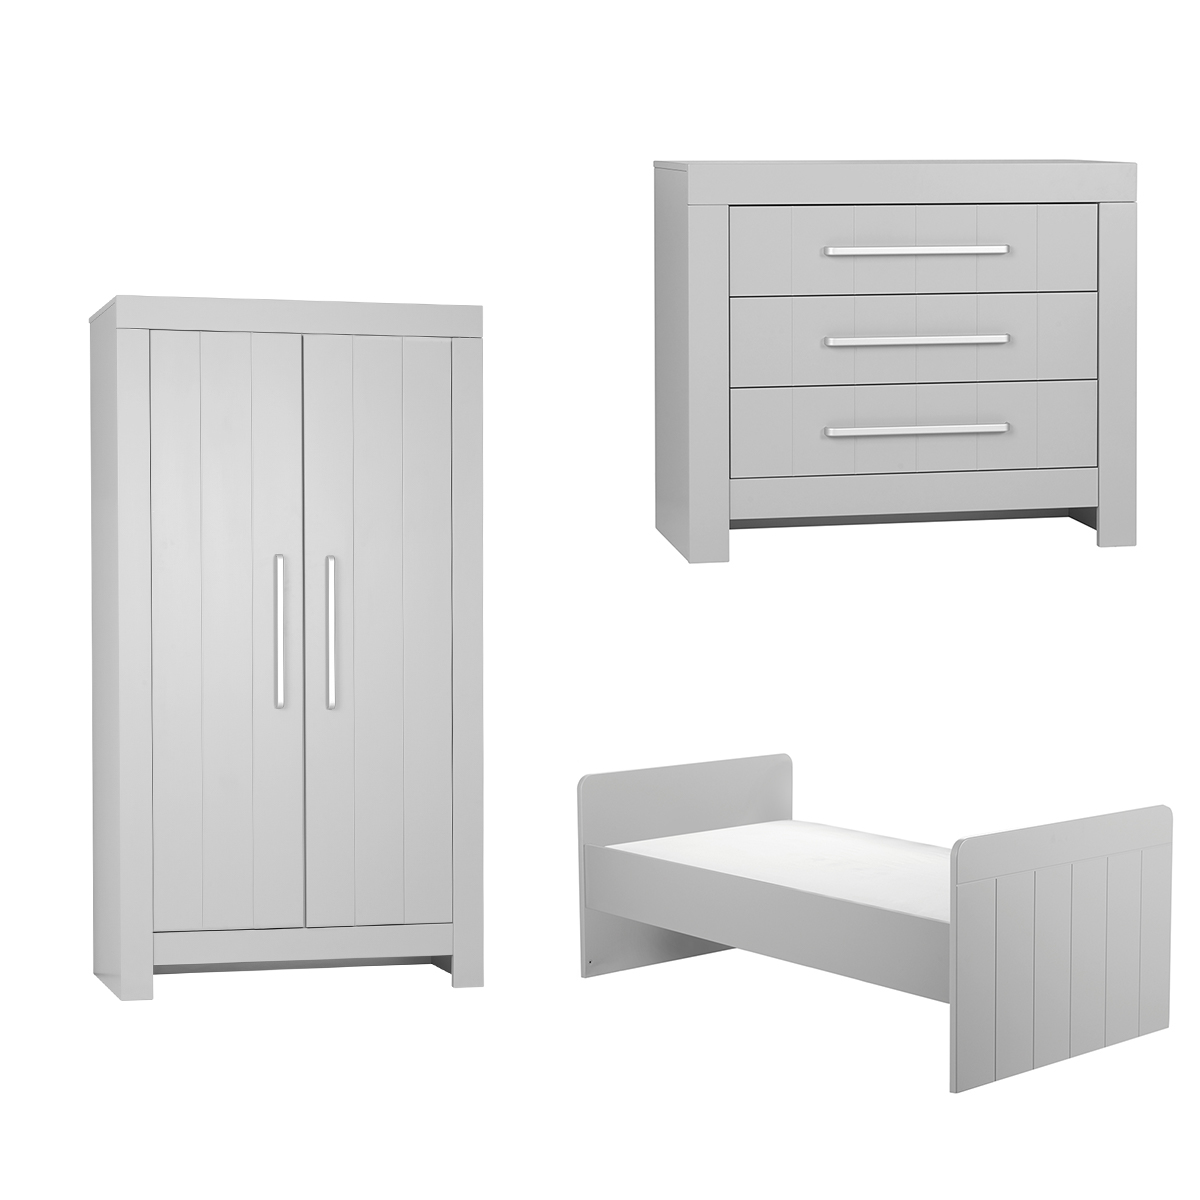 pinio_calmo_gris_pack_armoire_commode_lit_70_140